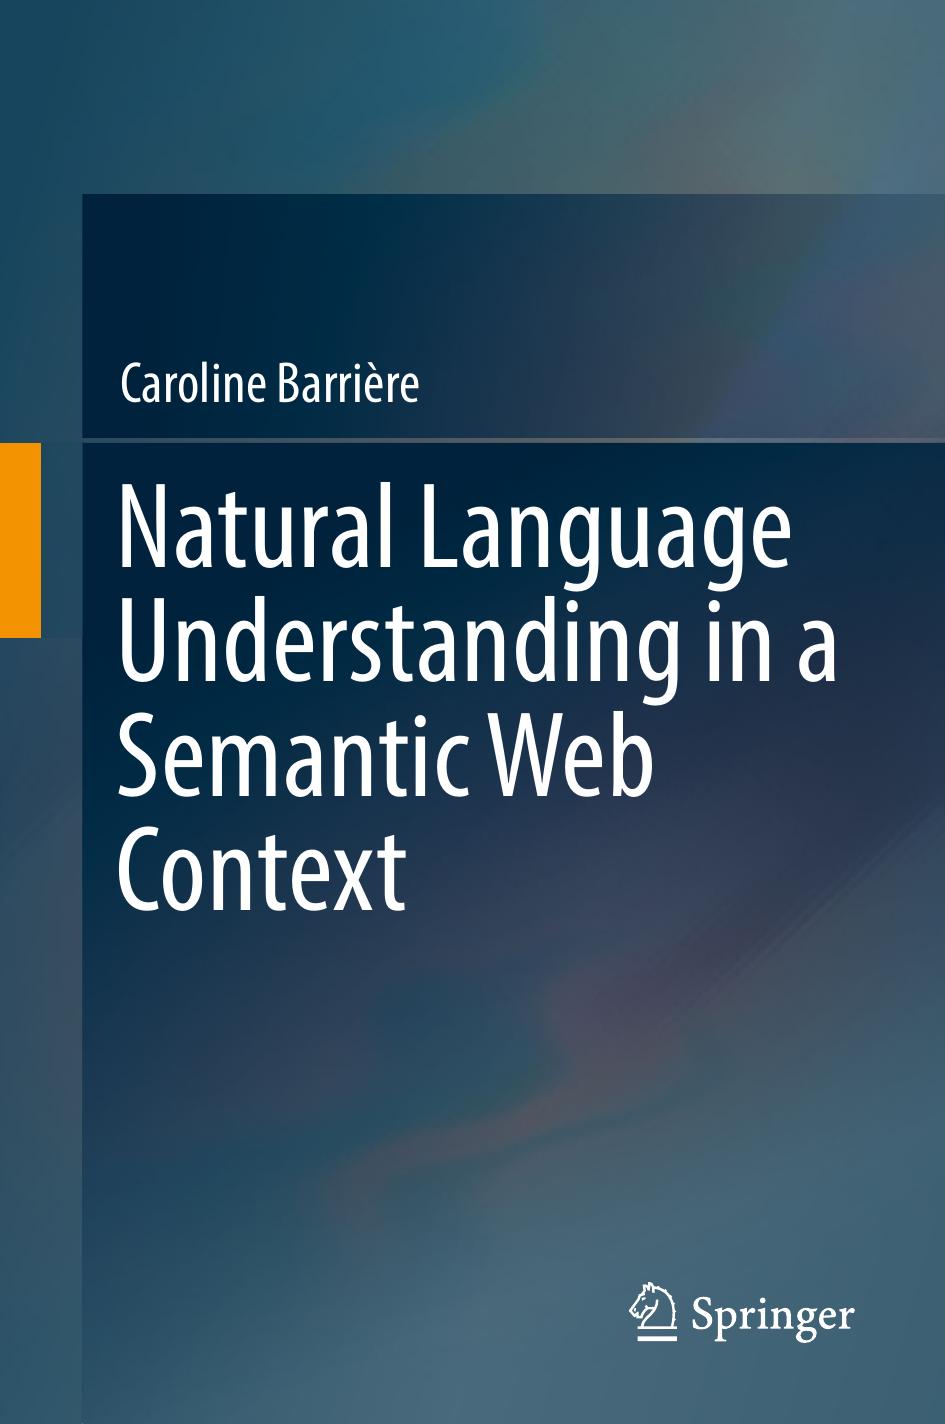 Natural Language Understanding in a Semantic Web Context